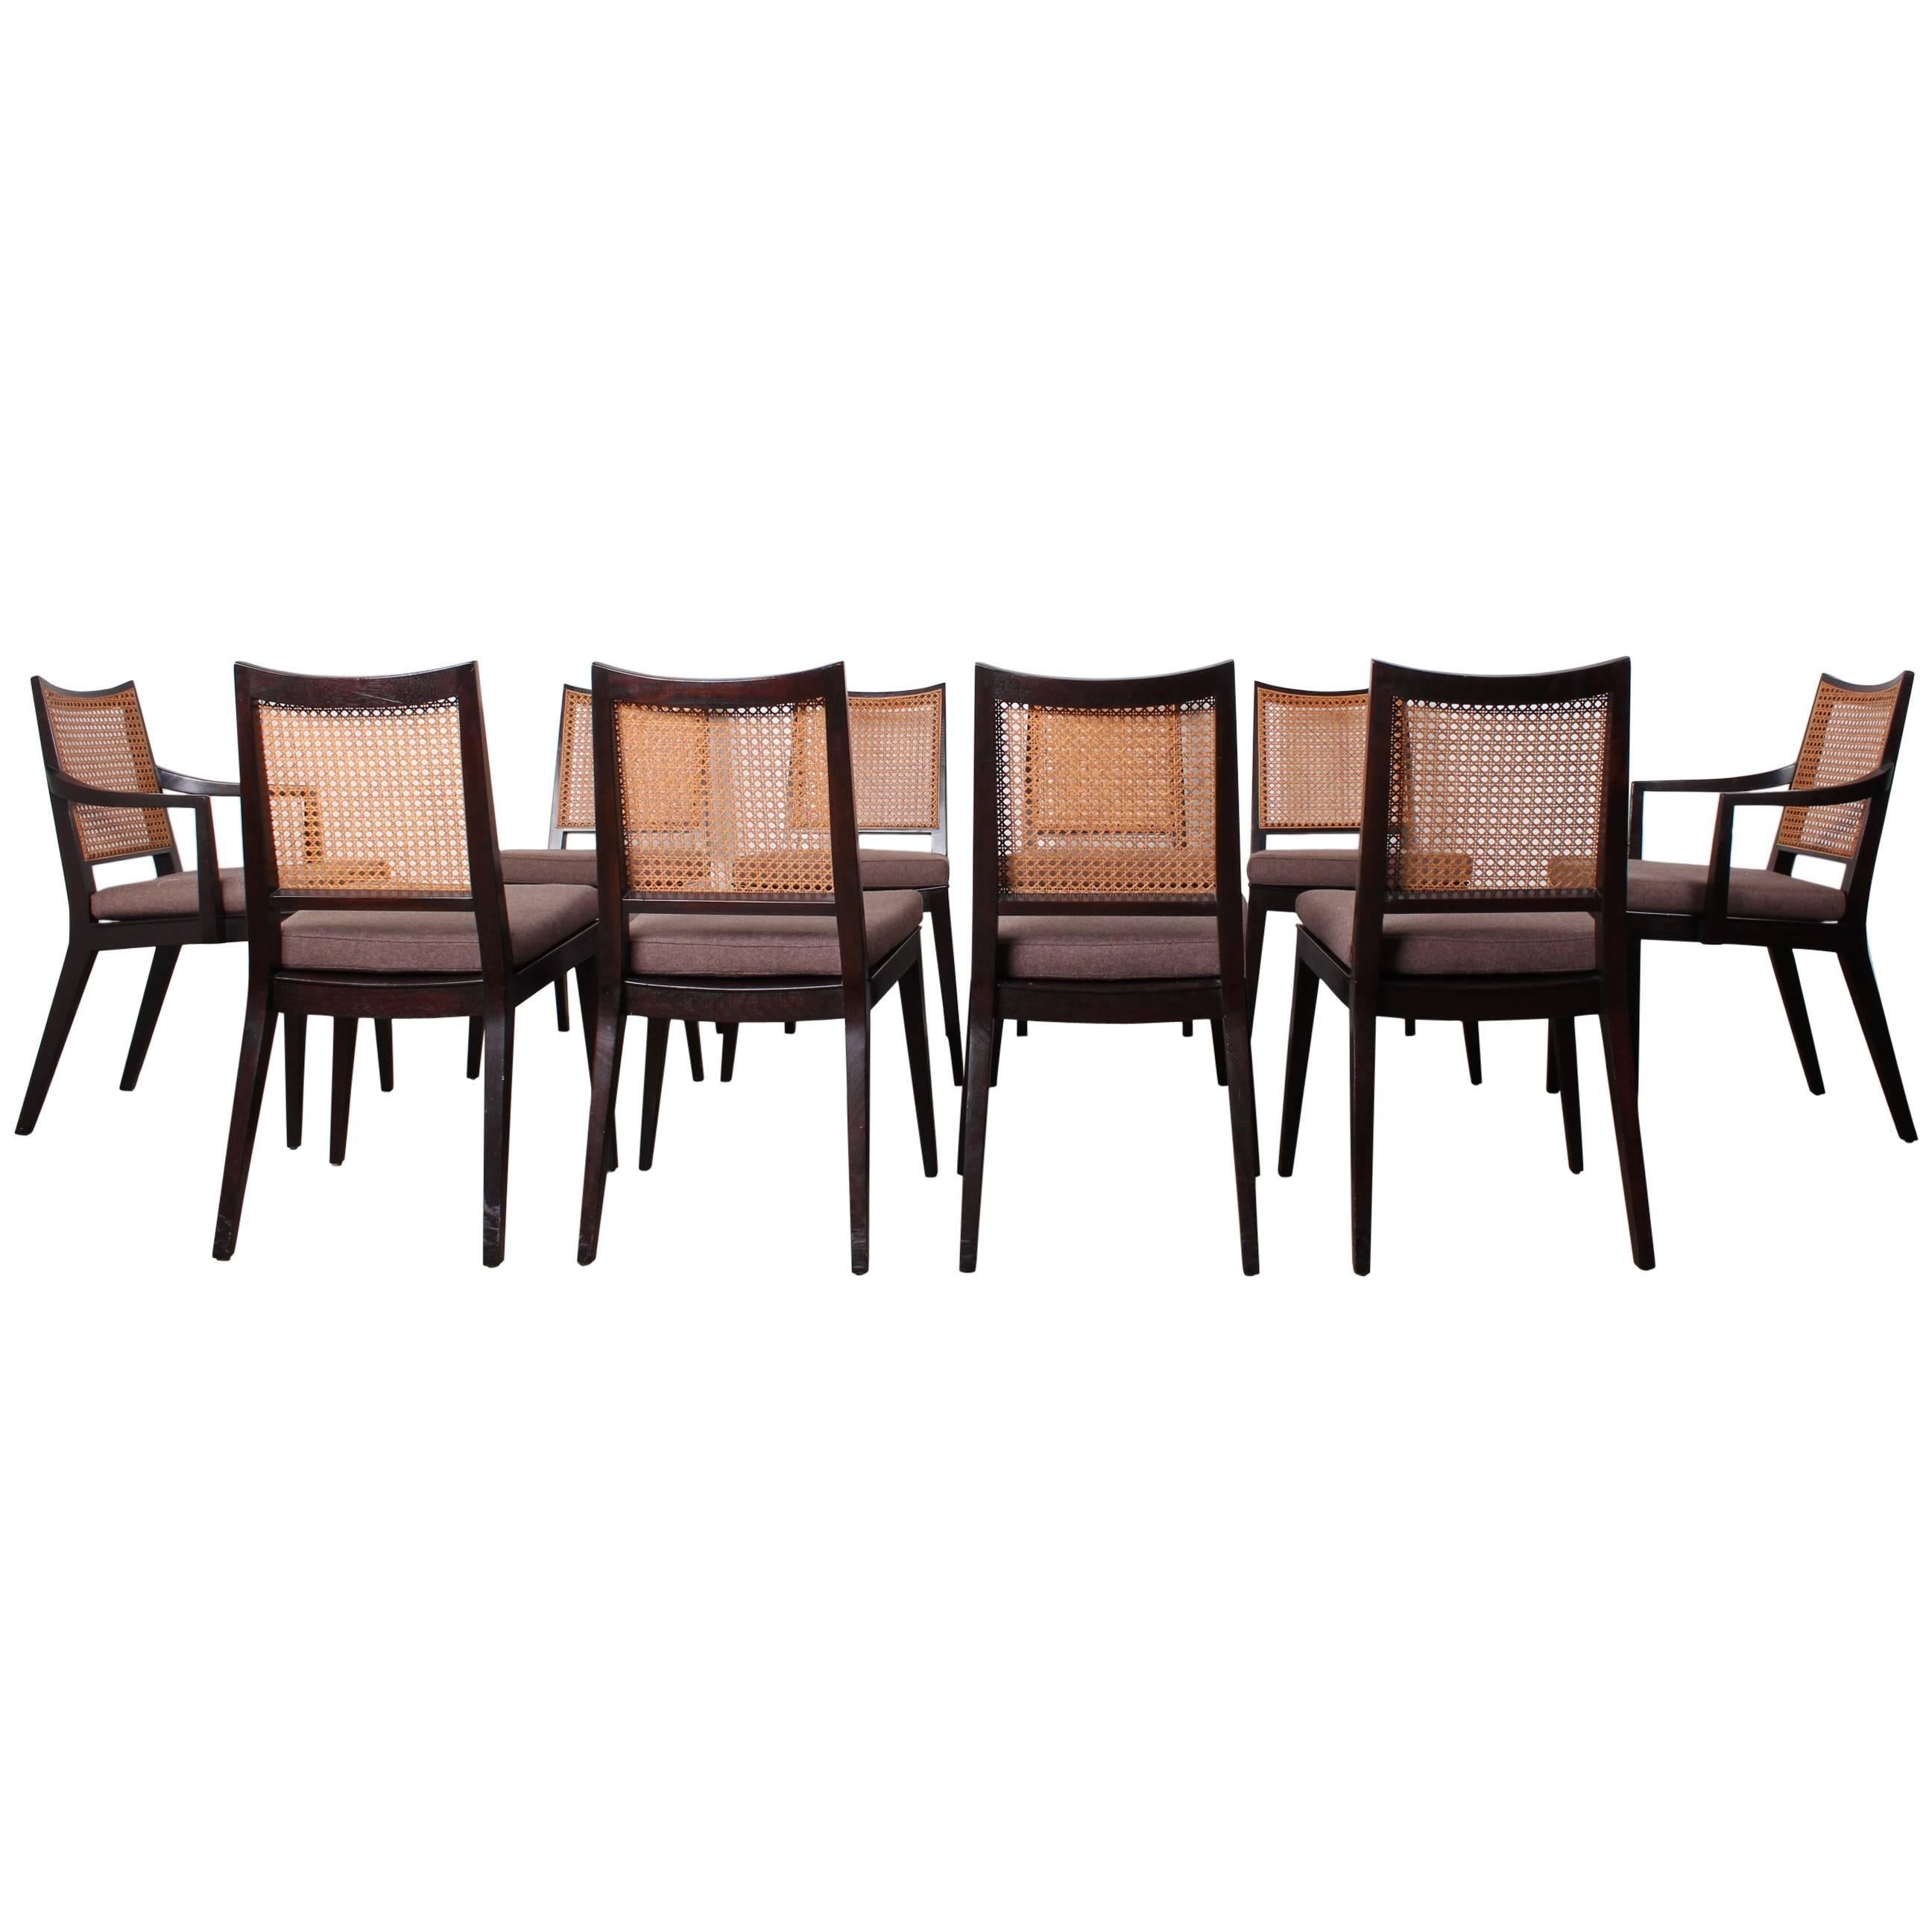 Set of Ten Dining Chairs by Edward Wormley for Dunbar